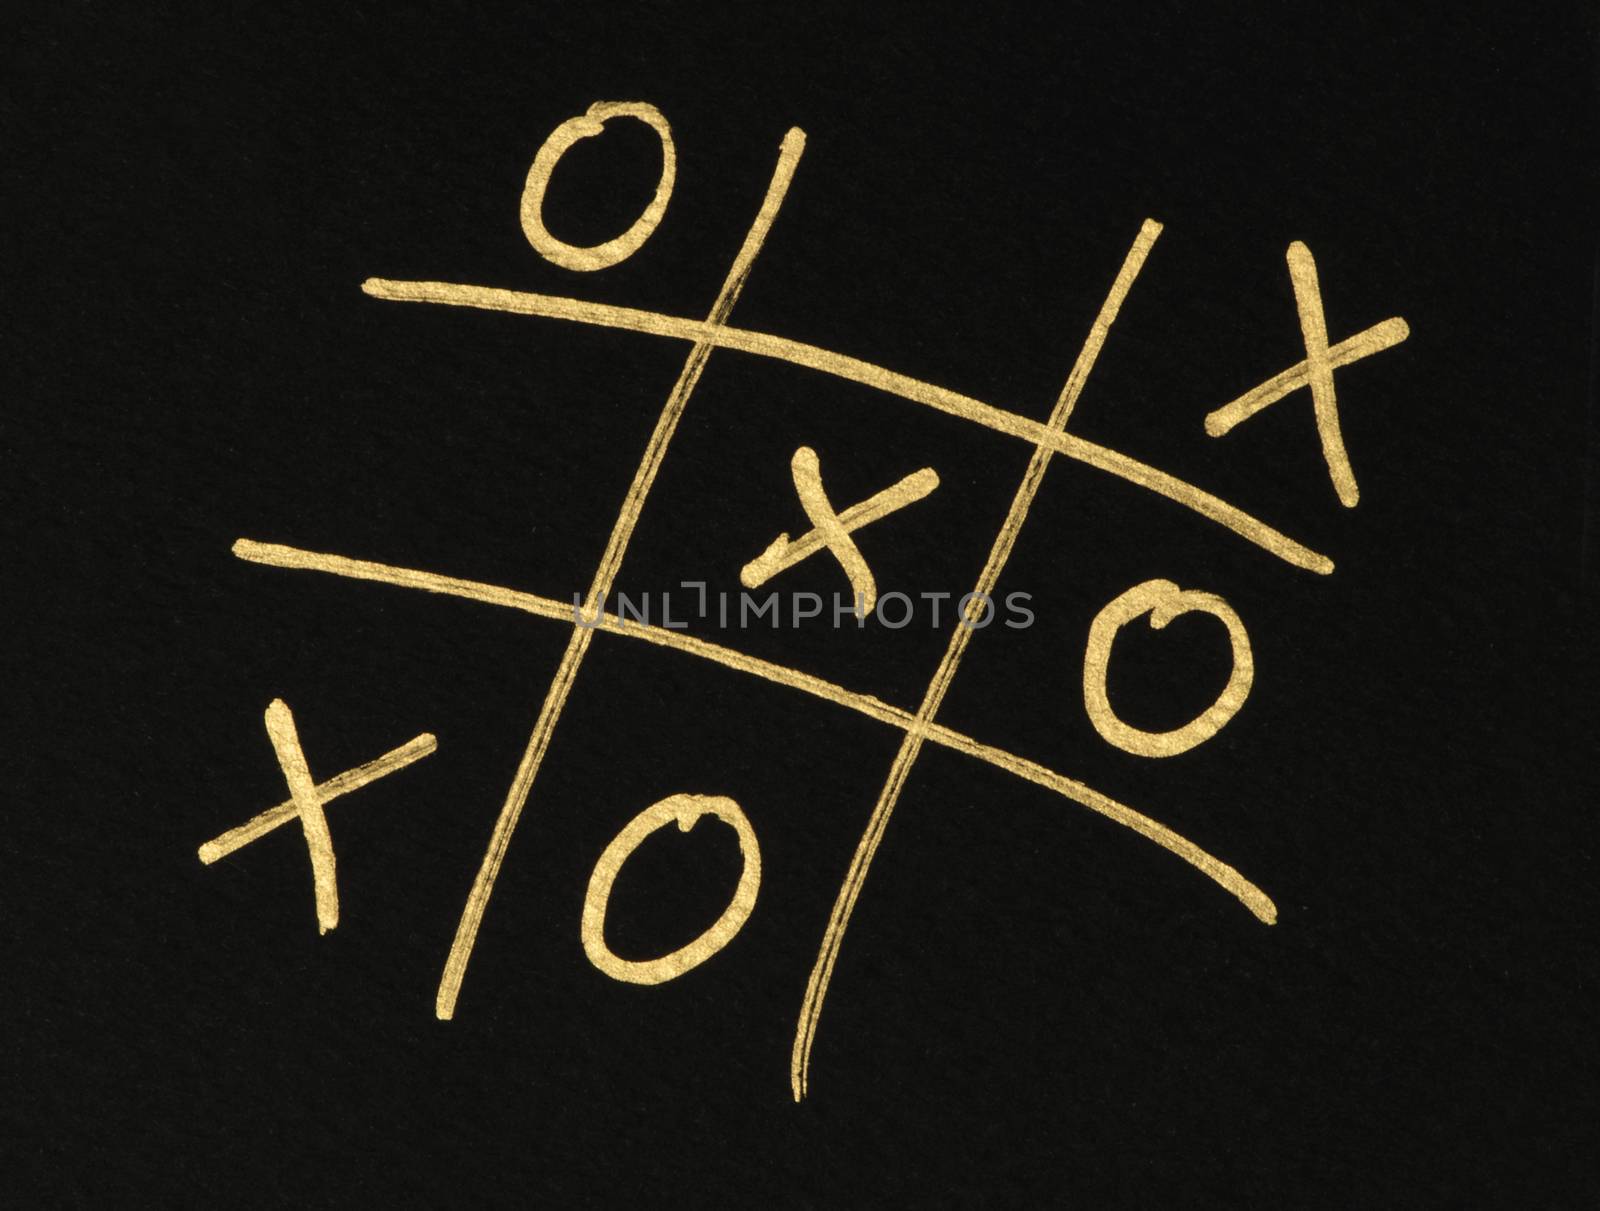 Hand-drawn tic-tac-toe game. Gold color text over black